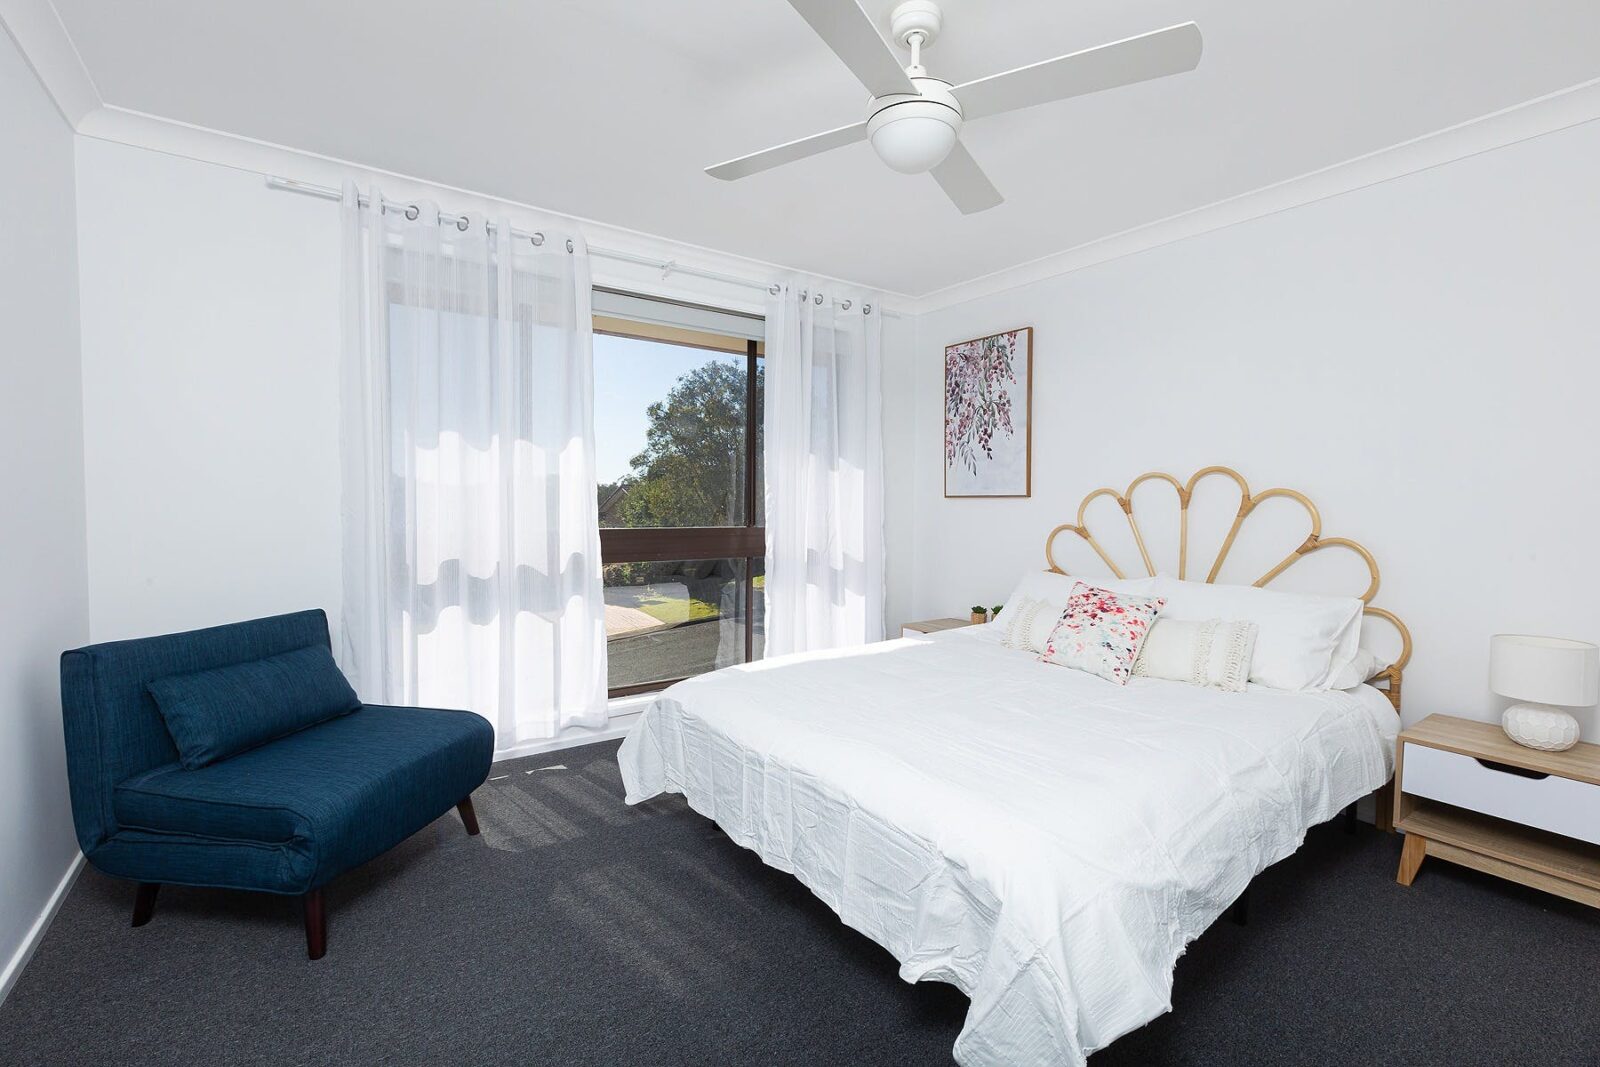 Main bedroom with Queen with stylish rattan bedhead, air-conditioning, ceiling fan, occasional chair